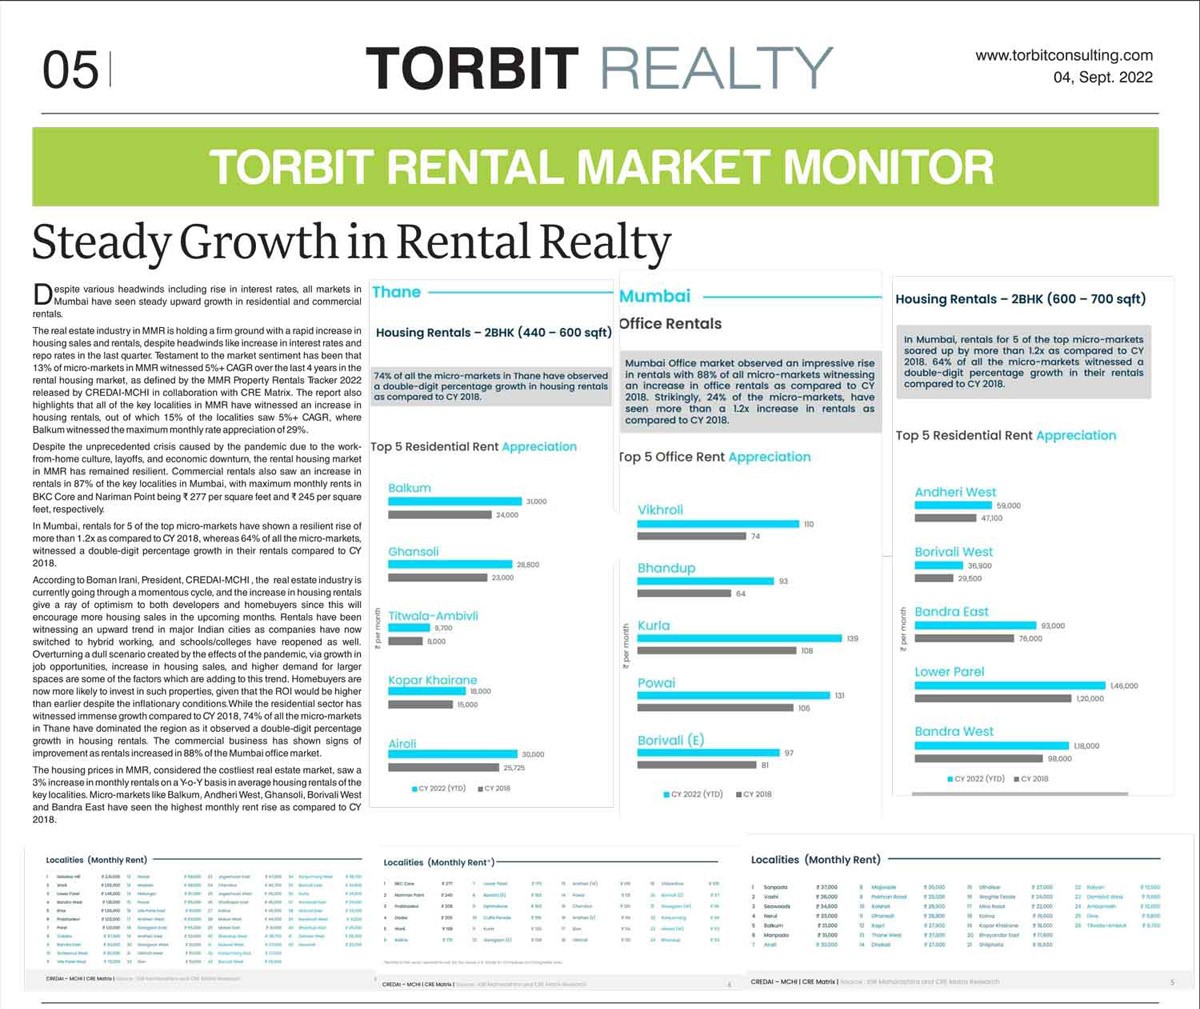 Torbit-Realty-4th-September-2022-4th-Page